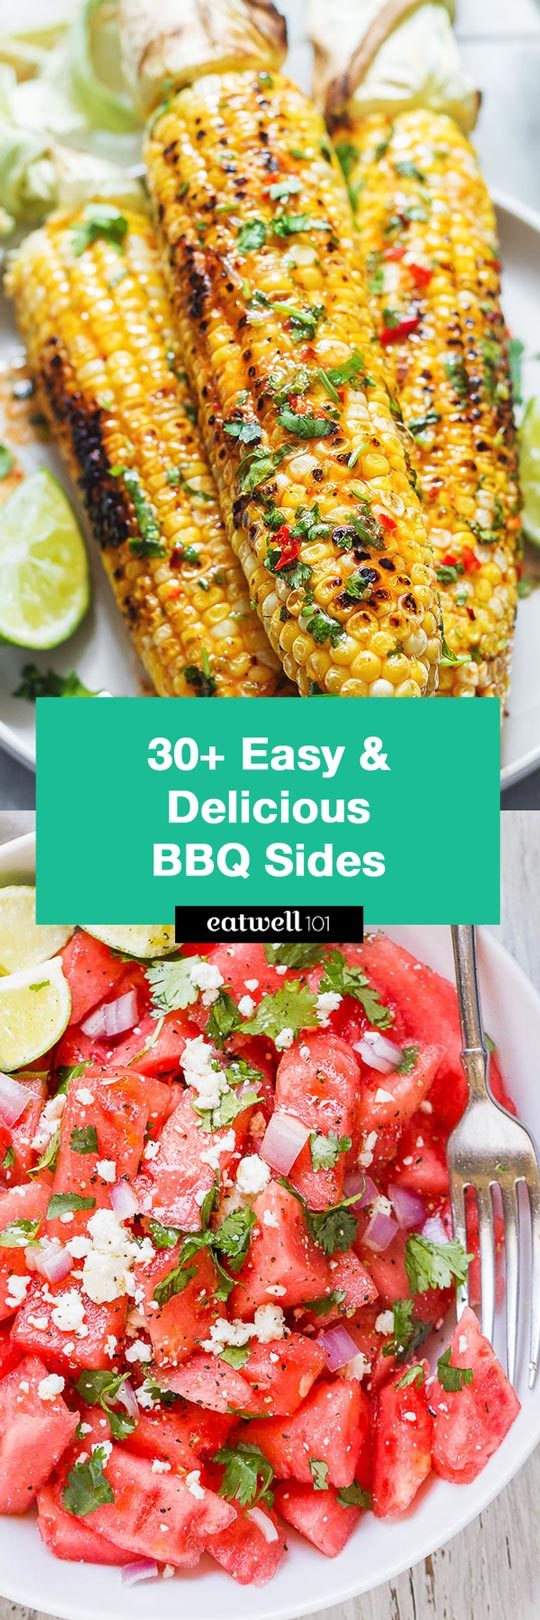 BBQ Side Dish Recipes - These will become your most requested sides of the summer!